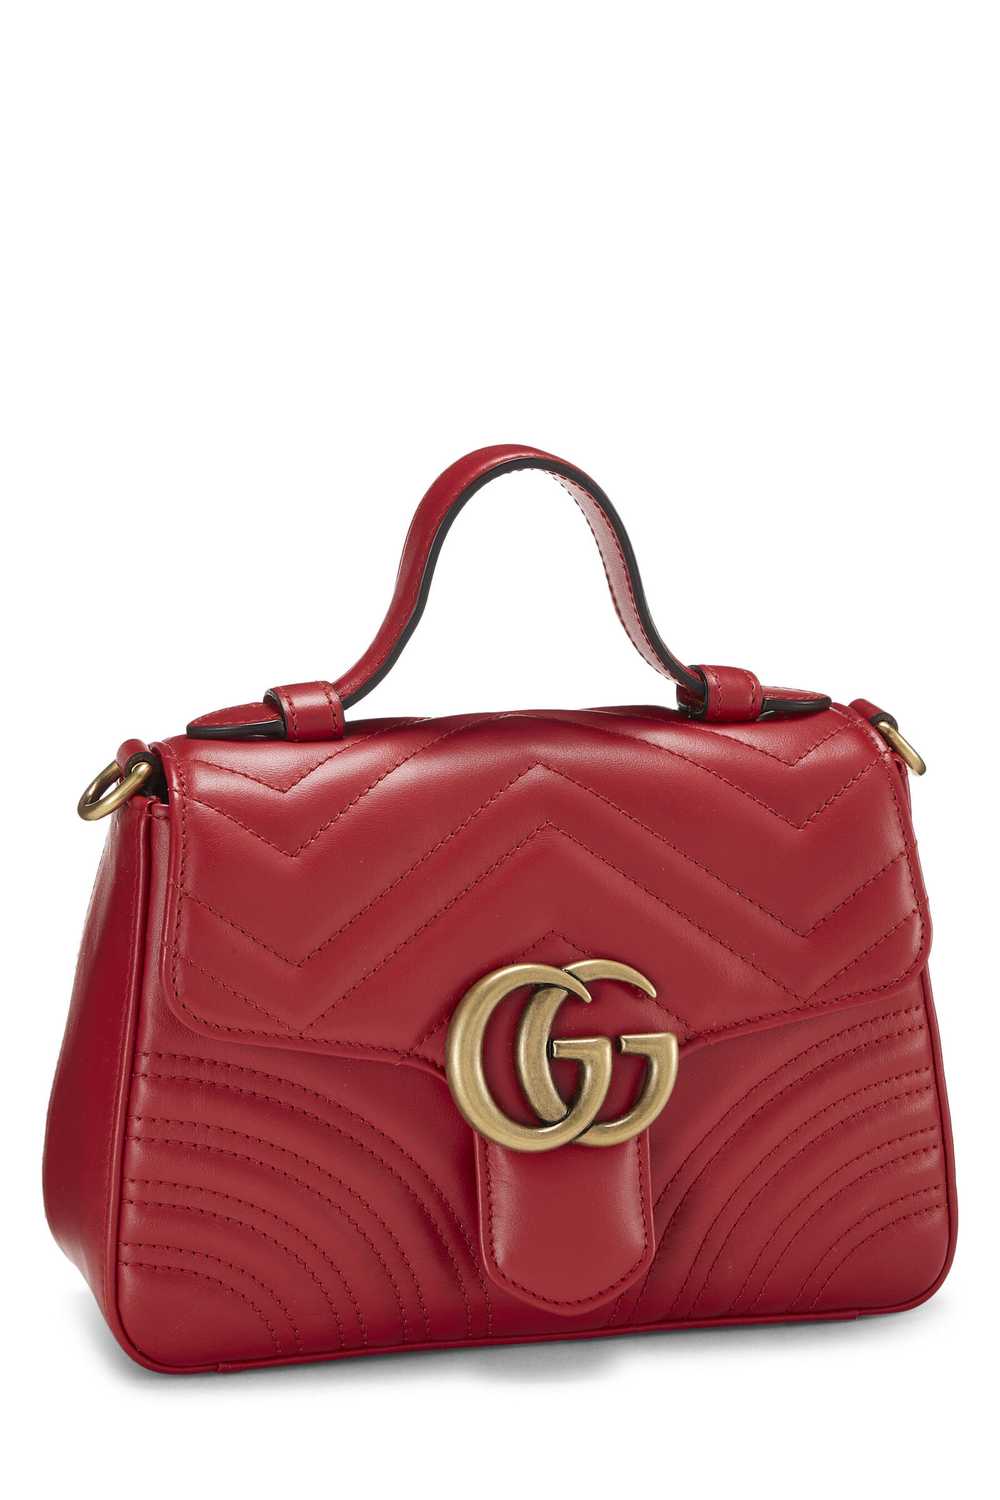 Red Leather GG Marmont Top Handle Bag Mini - image 2